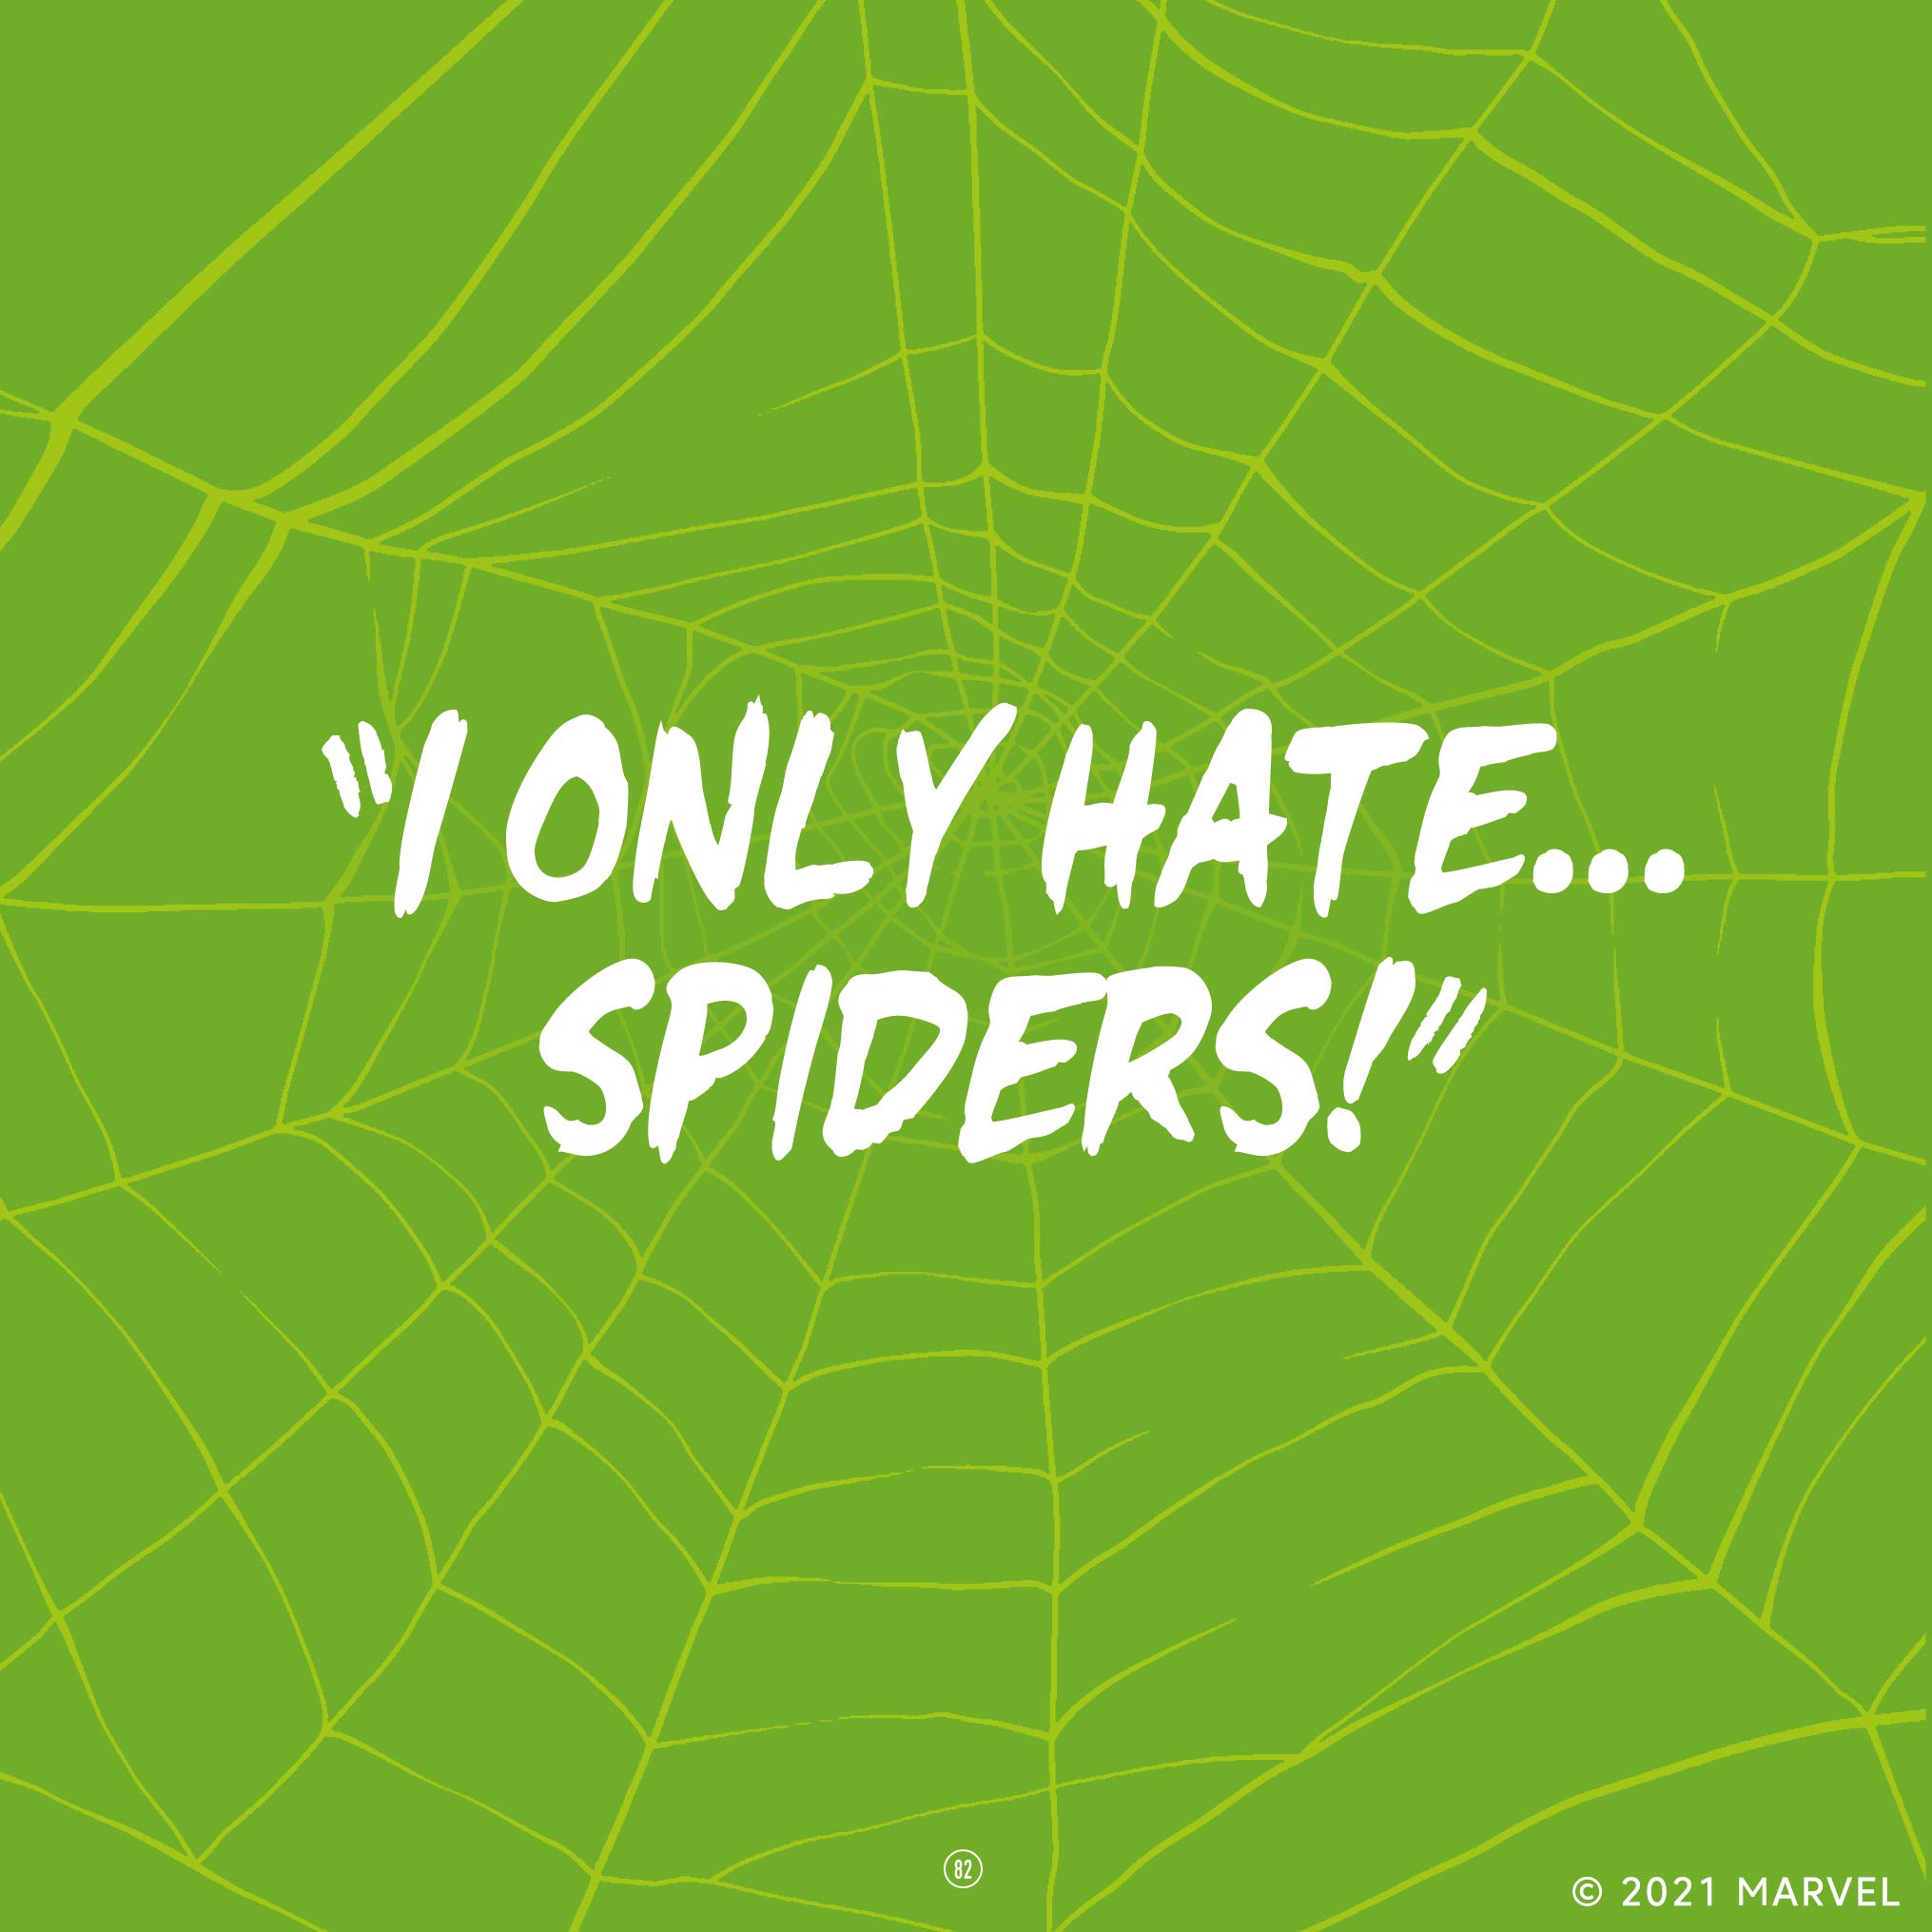 I only hate spiders